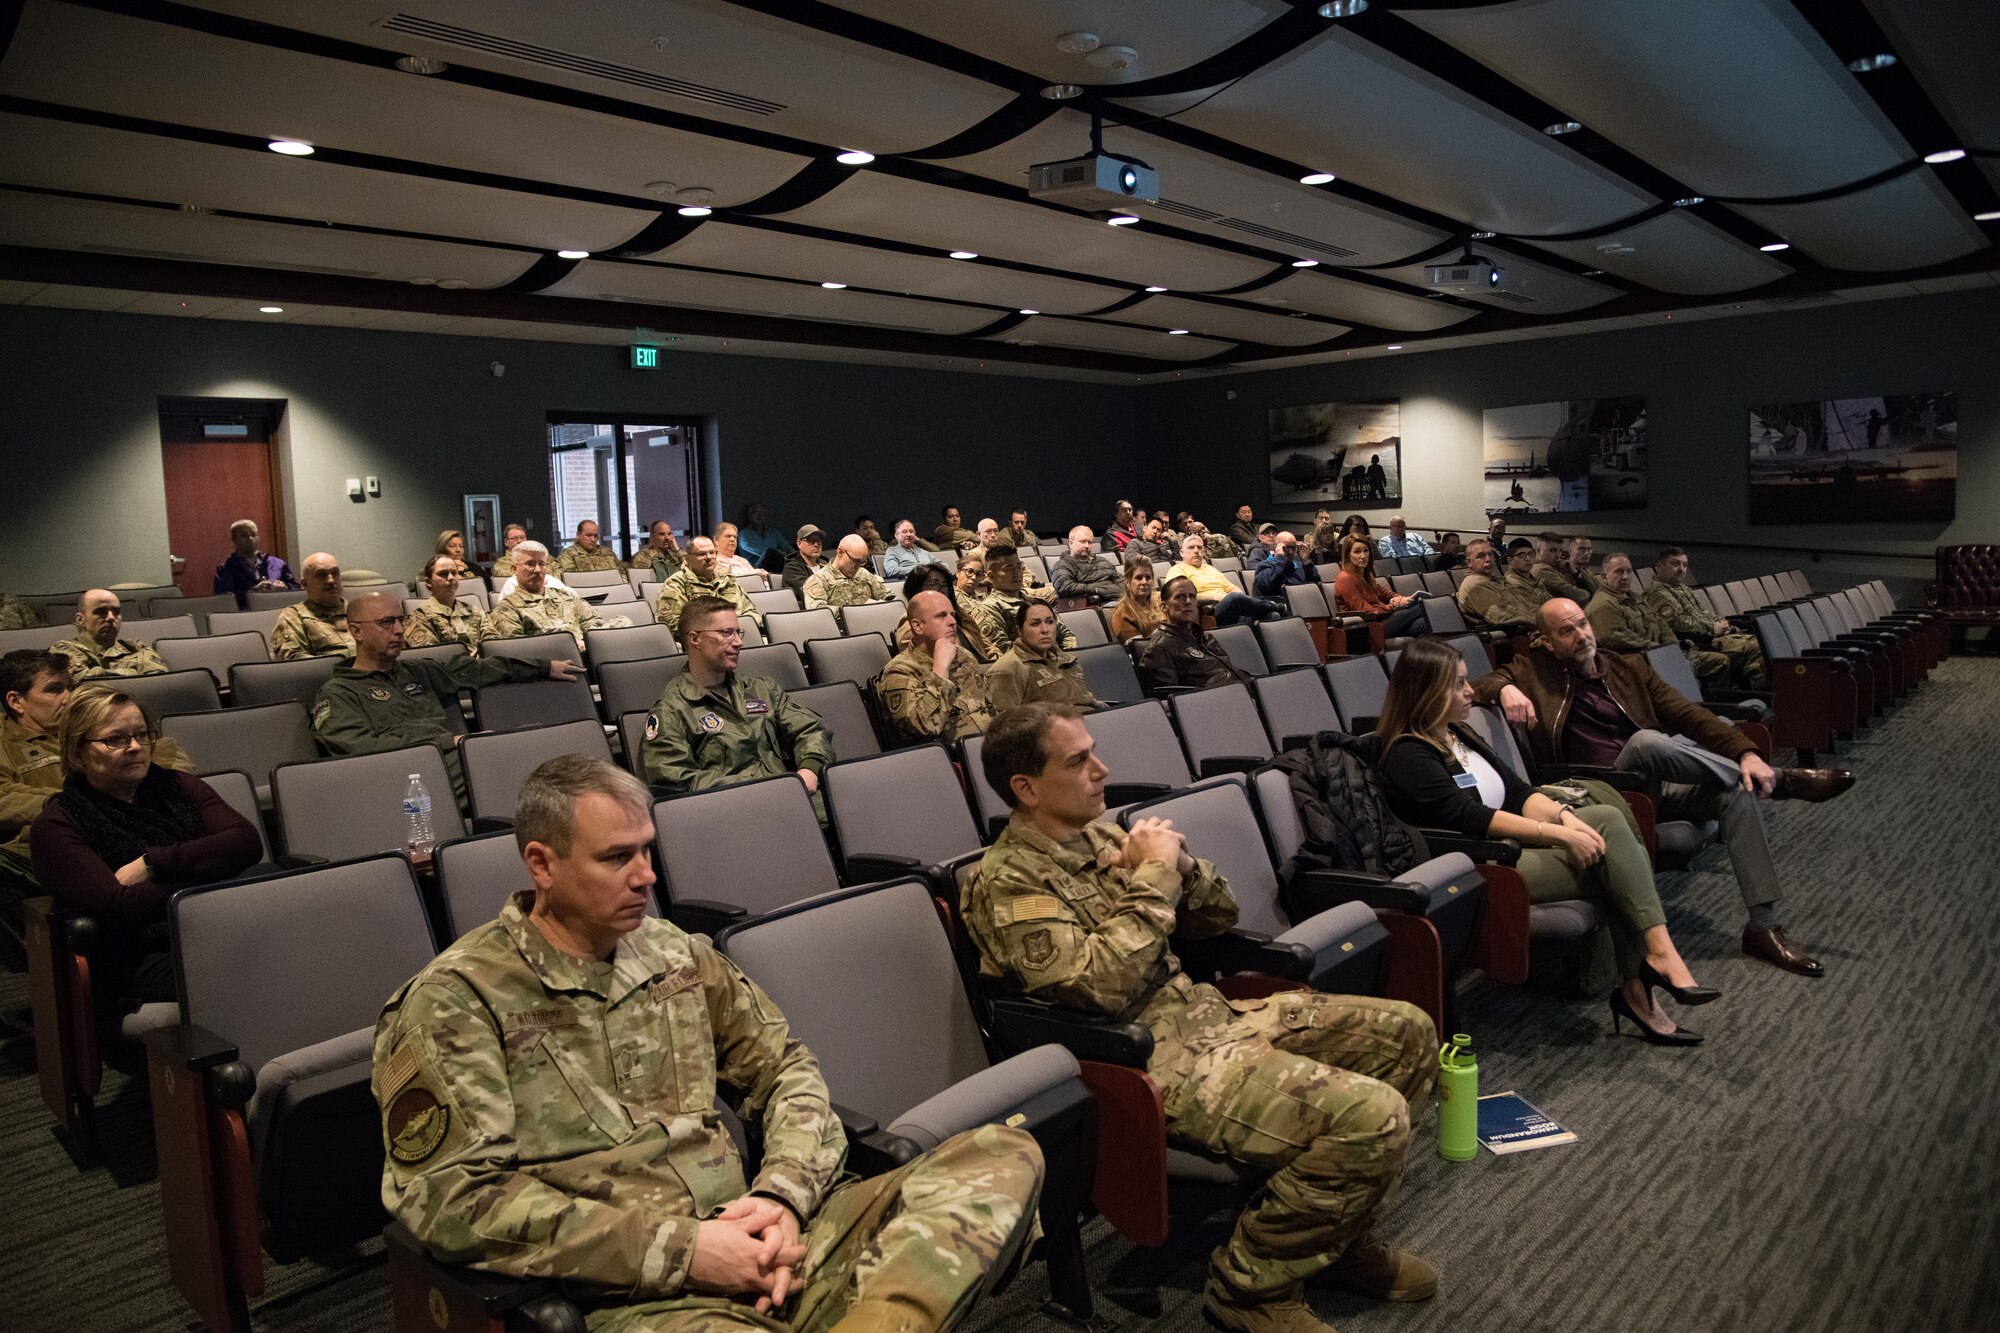 A group of people in a theater wearing a mix of OCP and civilian clothes.